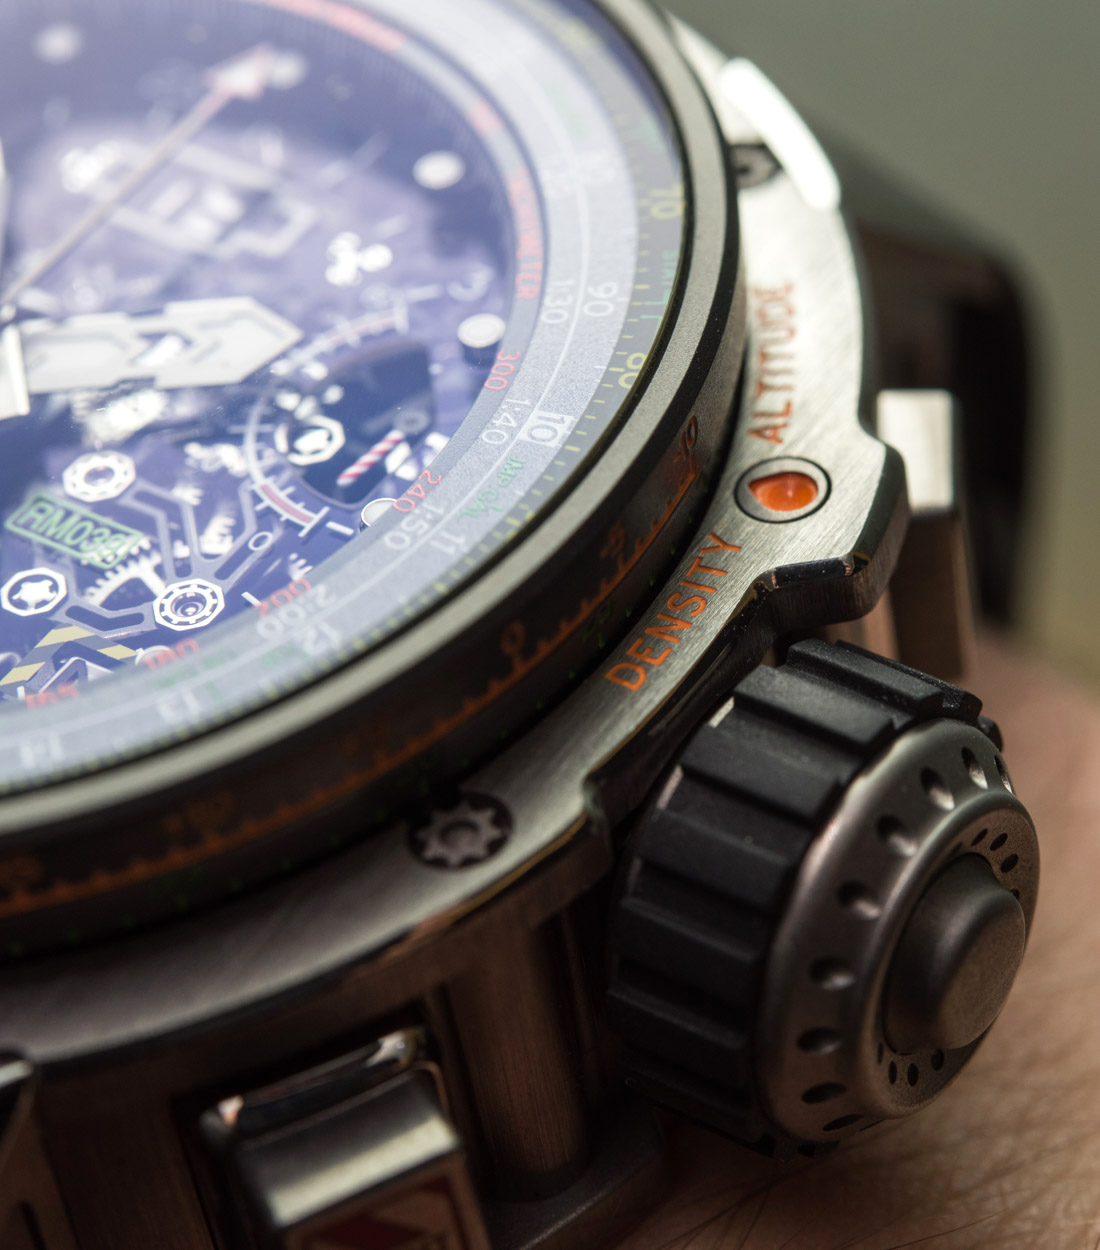 Richard Mille RM 039 Tourbillon Aviation E6-B Flyback Chronograph Watch Hands-On Hands-On 